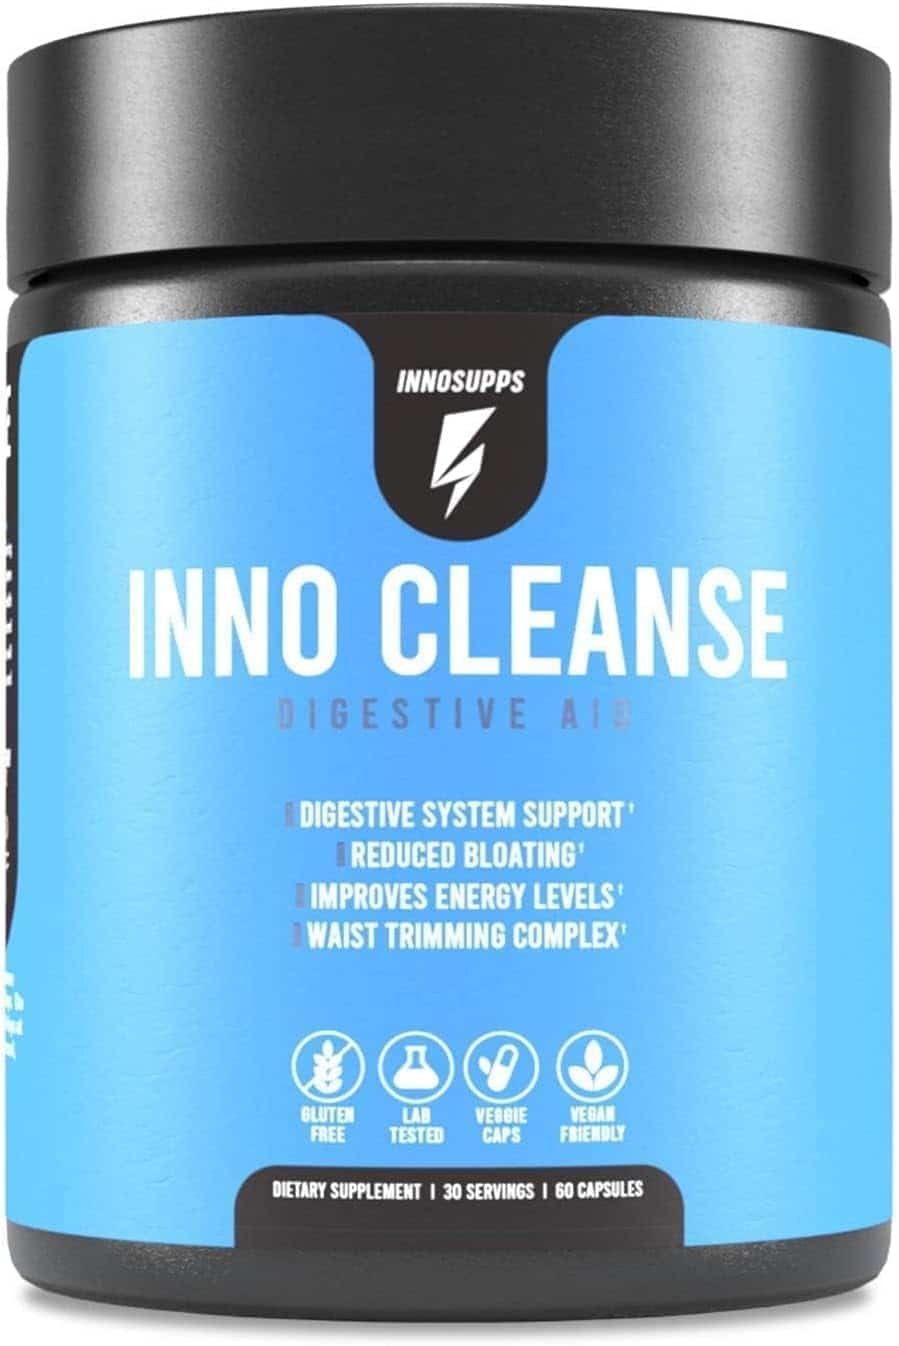 inno cleanse review bottle